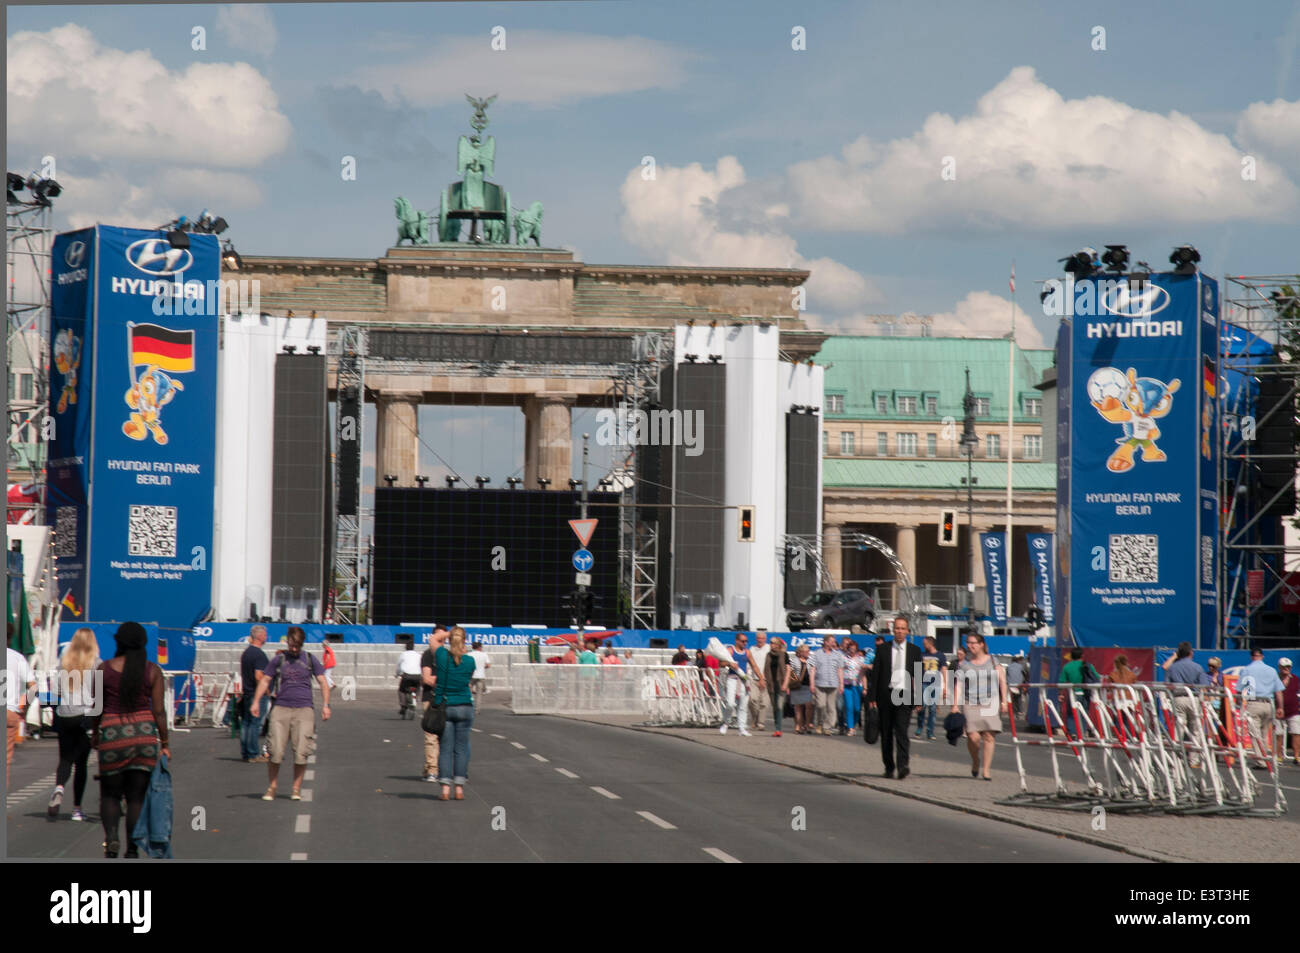 Berlin, Germany. 27th June, 2014. Preparations for 2014 FIFA World Cup live broadcasts at the Brandenburger Tor, Berlin. The iconic Brandenburg Gate is all but masked by the temporary stage. Credit:  Philip Game/Alamy Live News Stock Photo